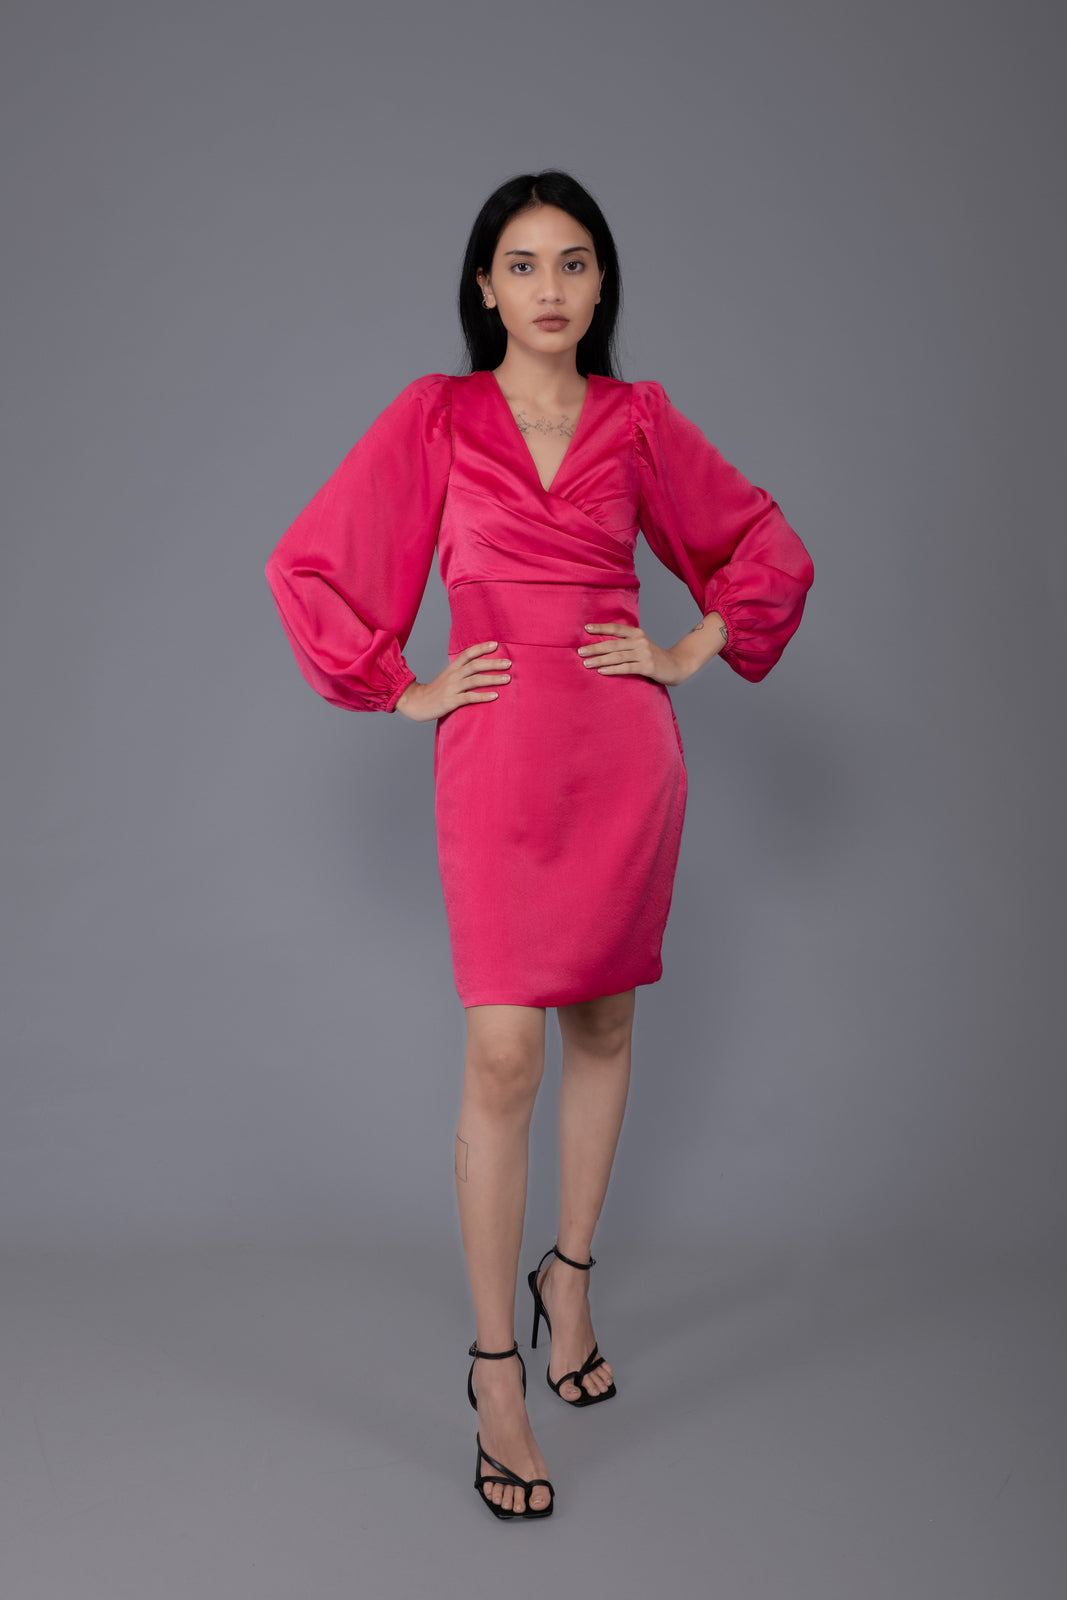 PUFF SLEEVE WITH WRAP ON FRONT BUST, PENCIL CUT MINI DRESS